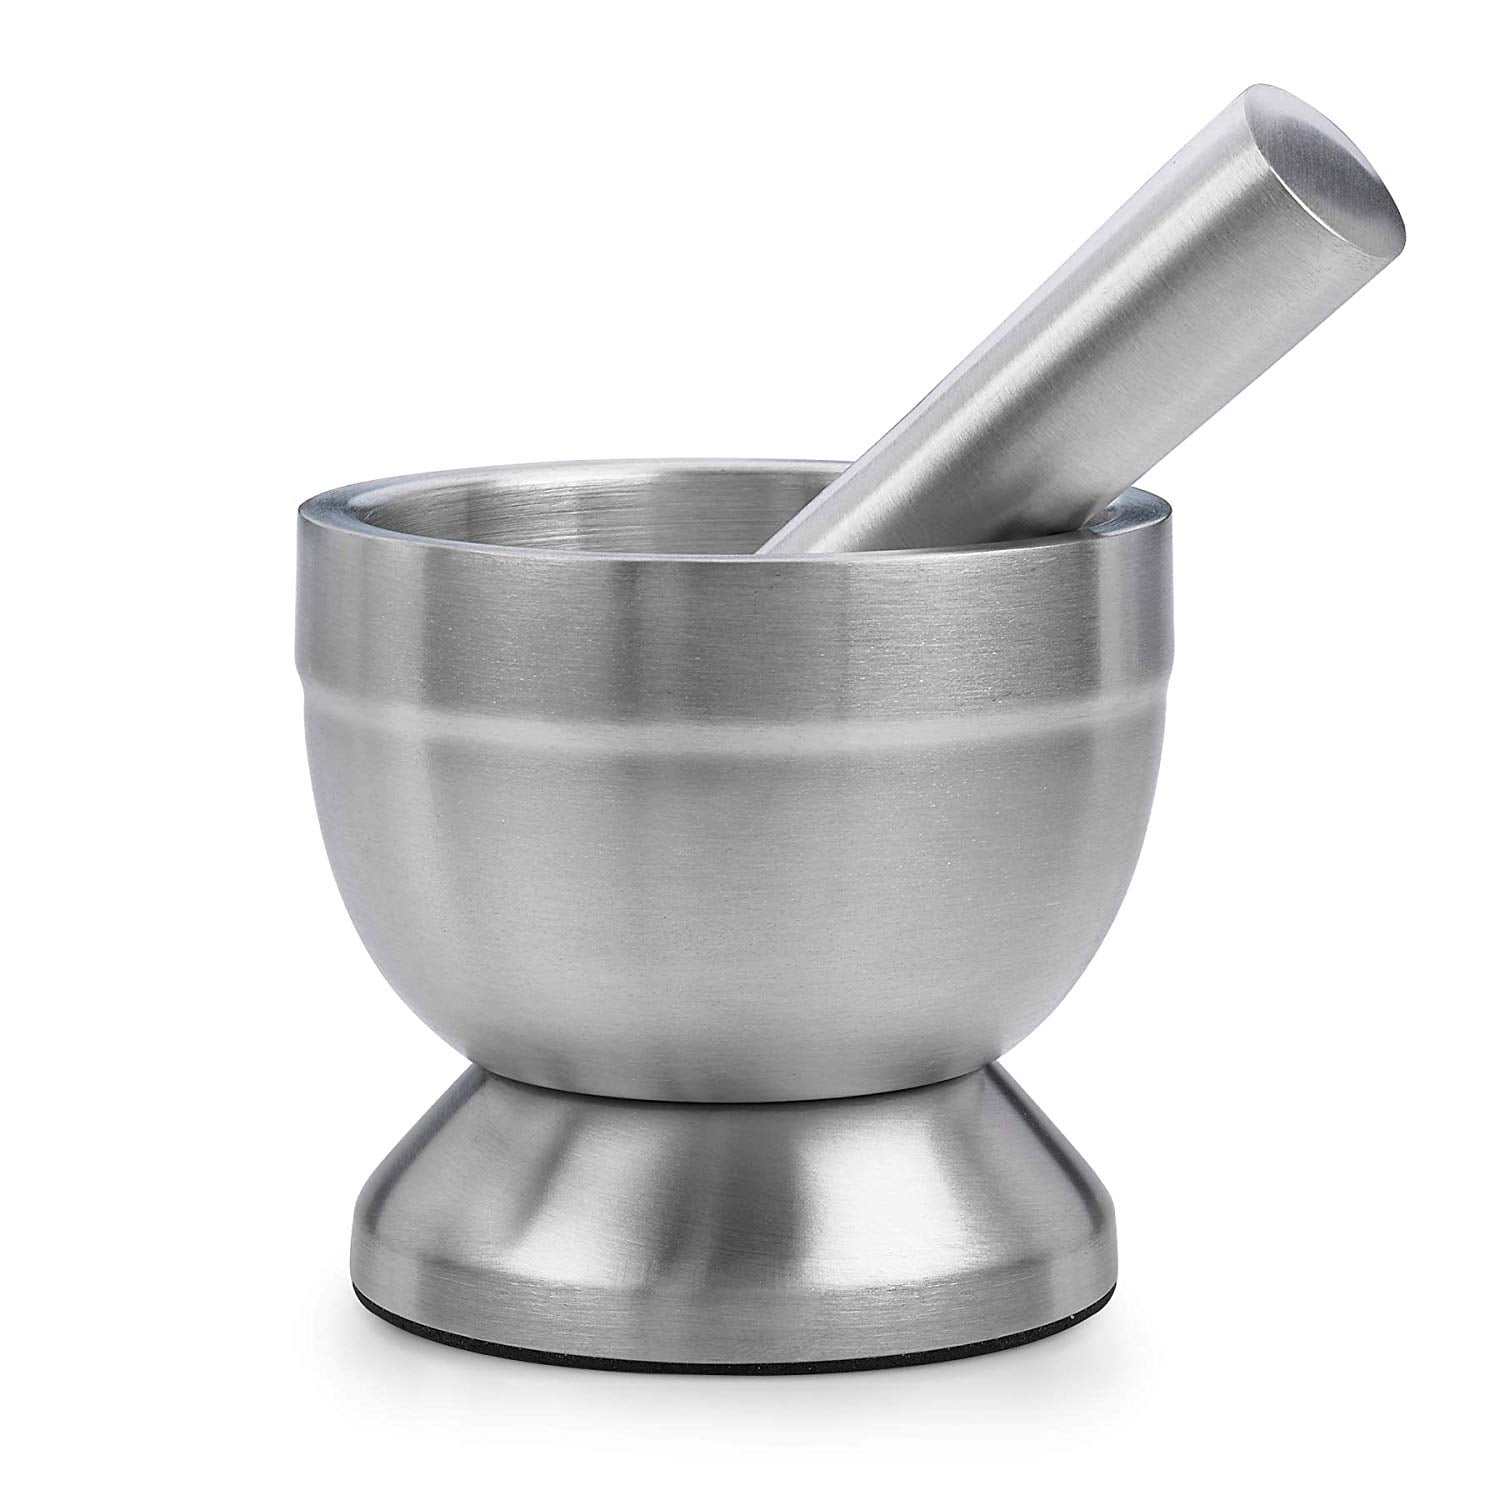 Details about   Tera Mortar and Pestle Sets 18/8 Stainless Steel Pill Crusher Food Safe Spice... 